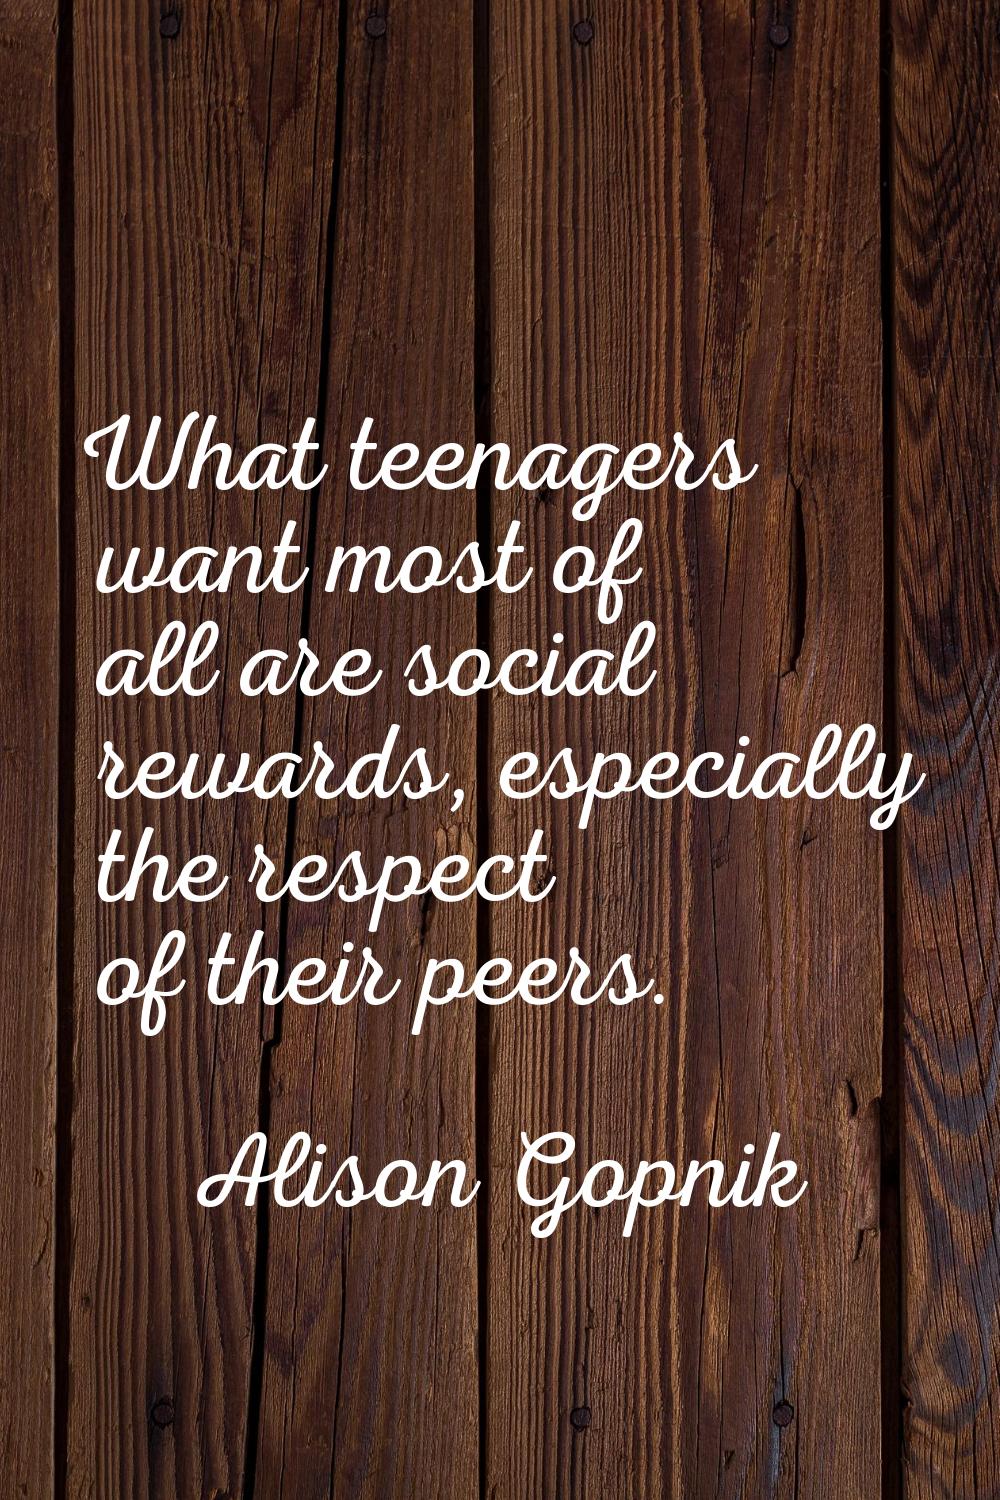 What teenagers want most of all are social rewards, especially the respect of their peers.